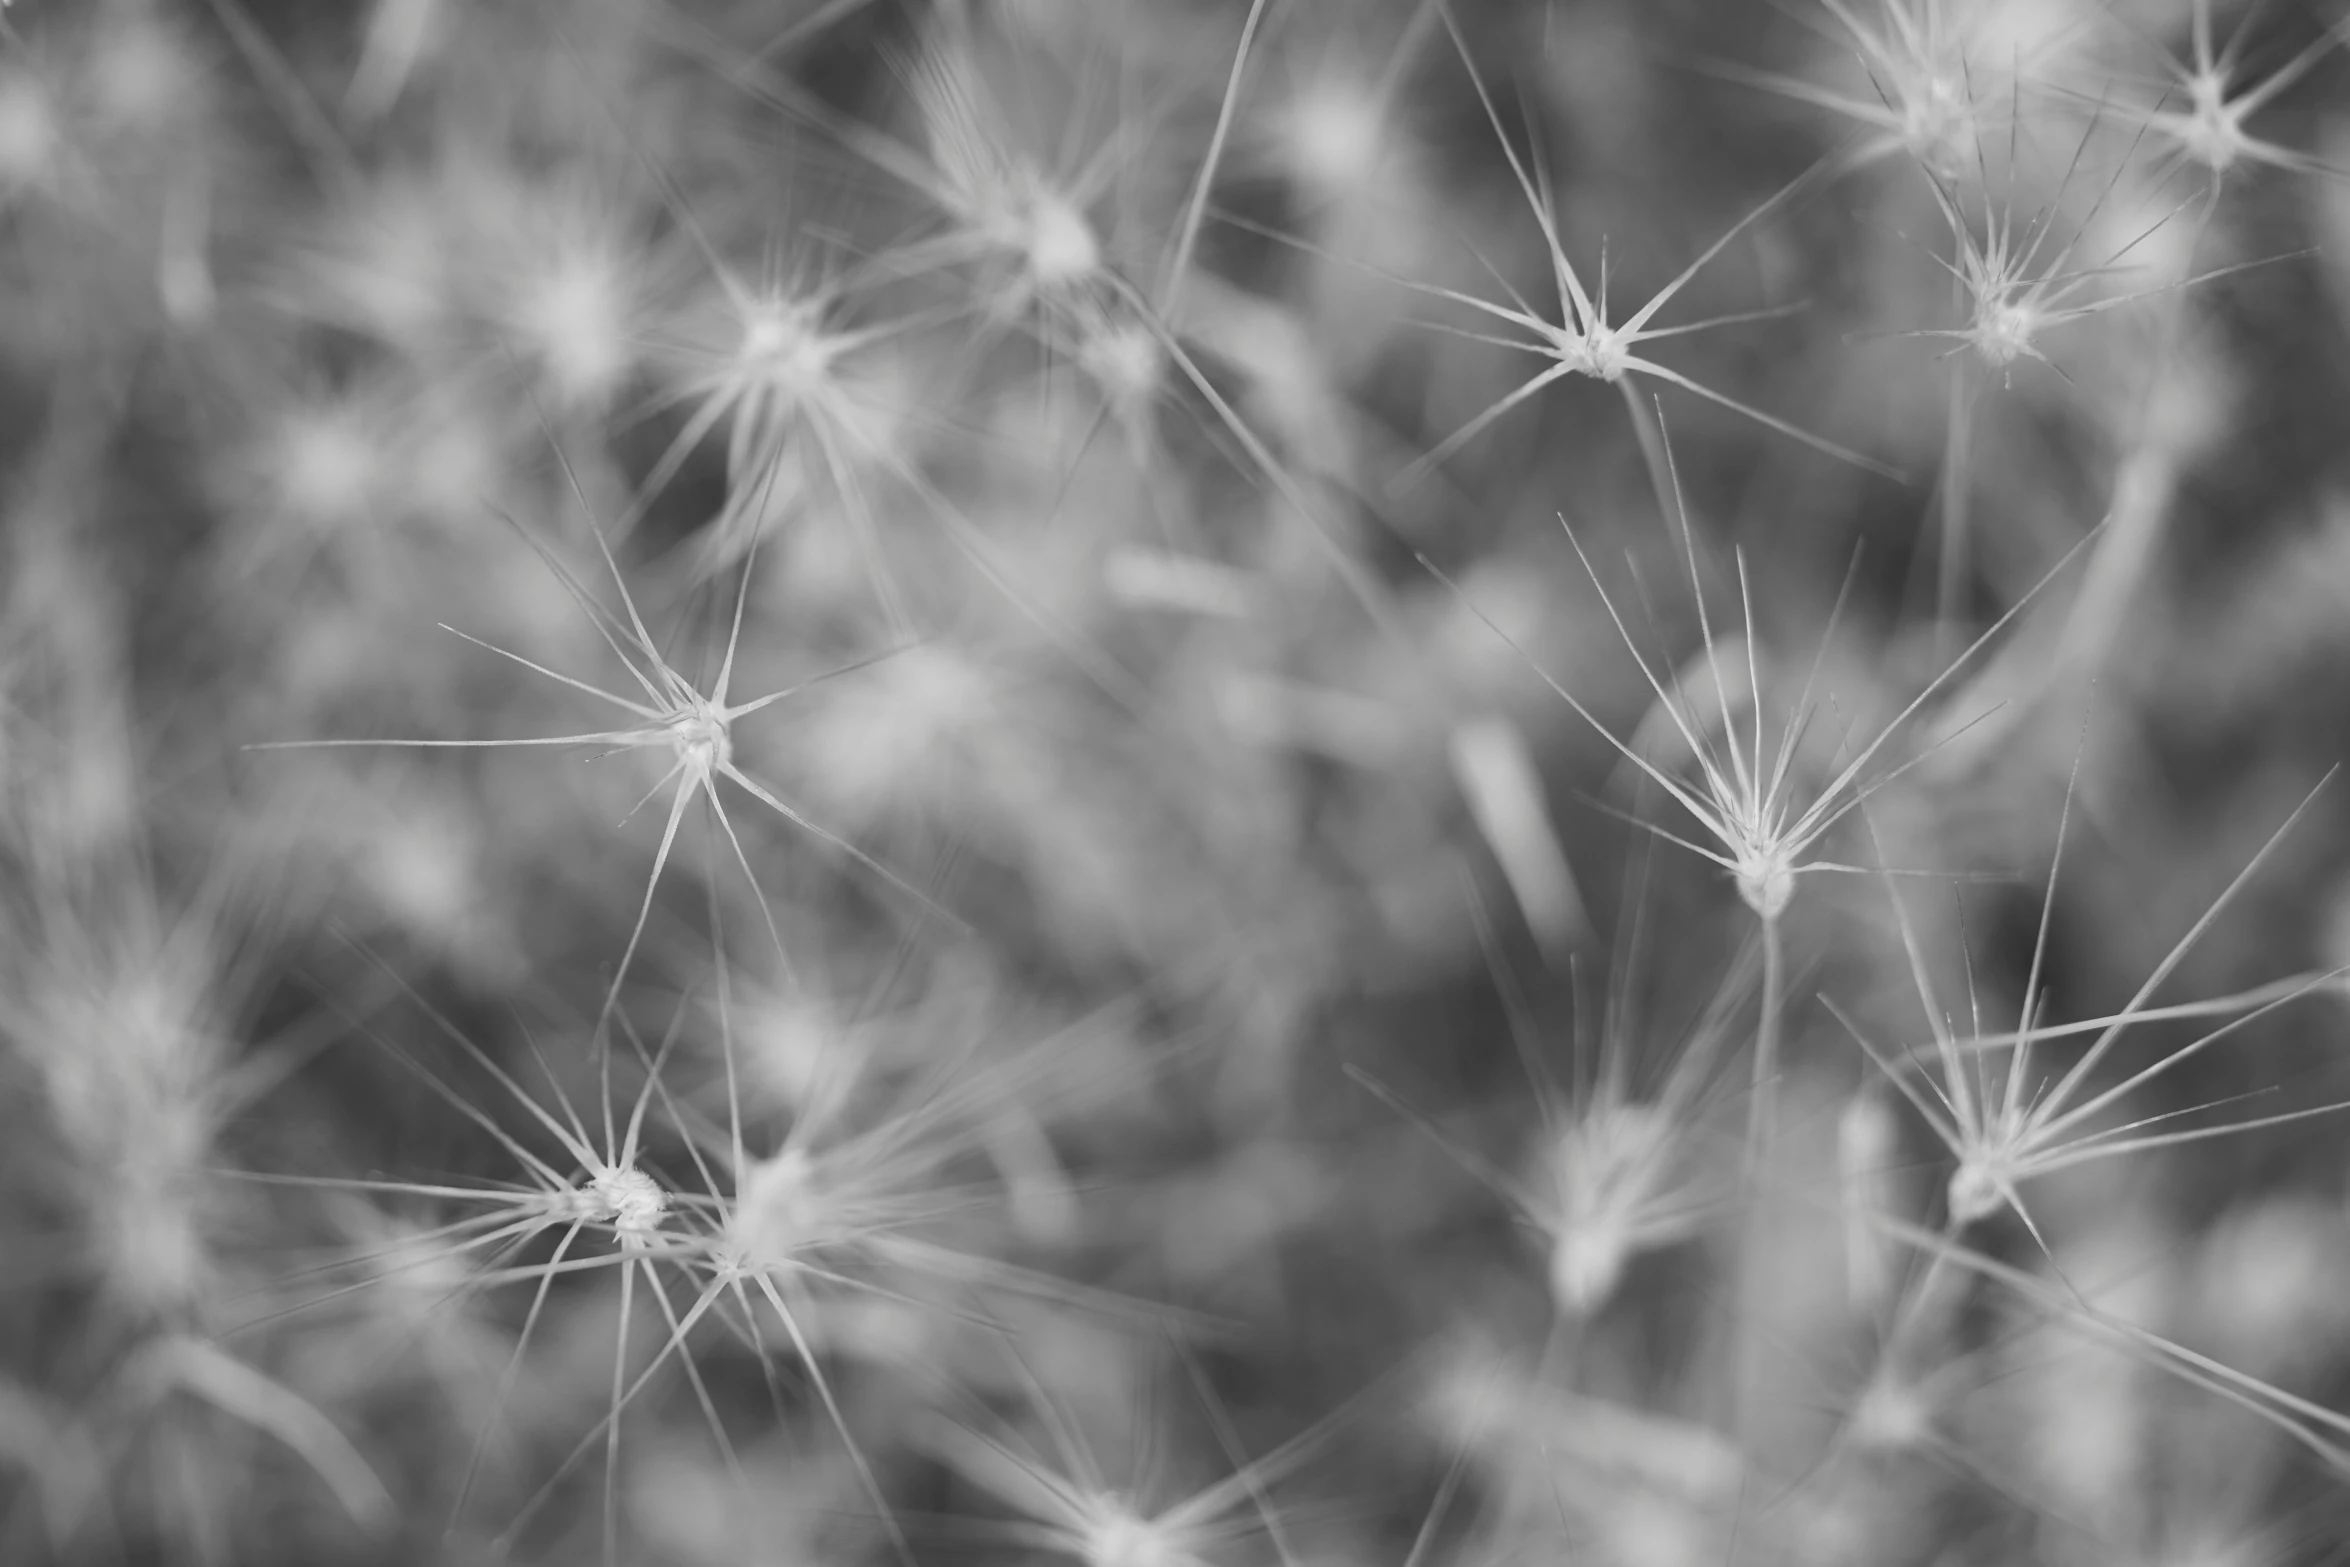 black and white pograph of a dandelion